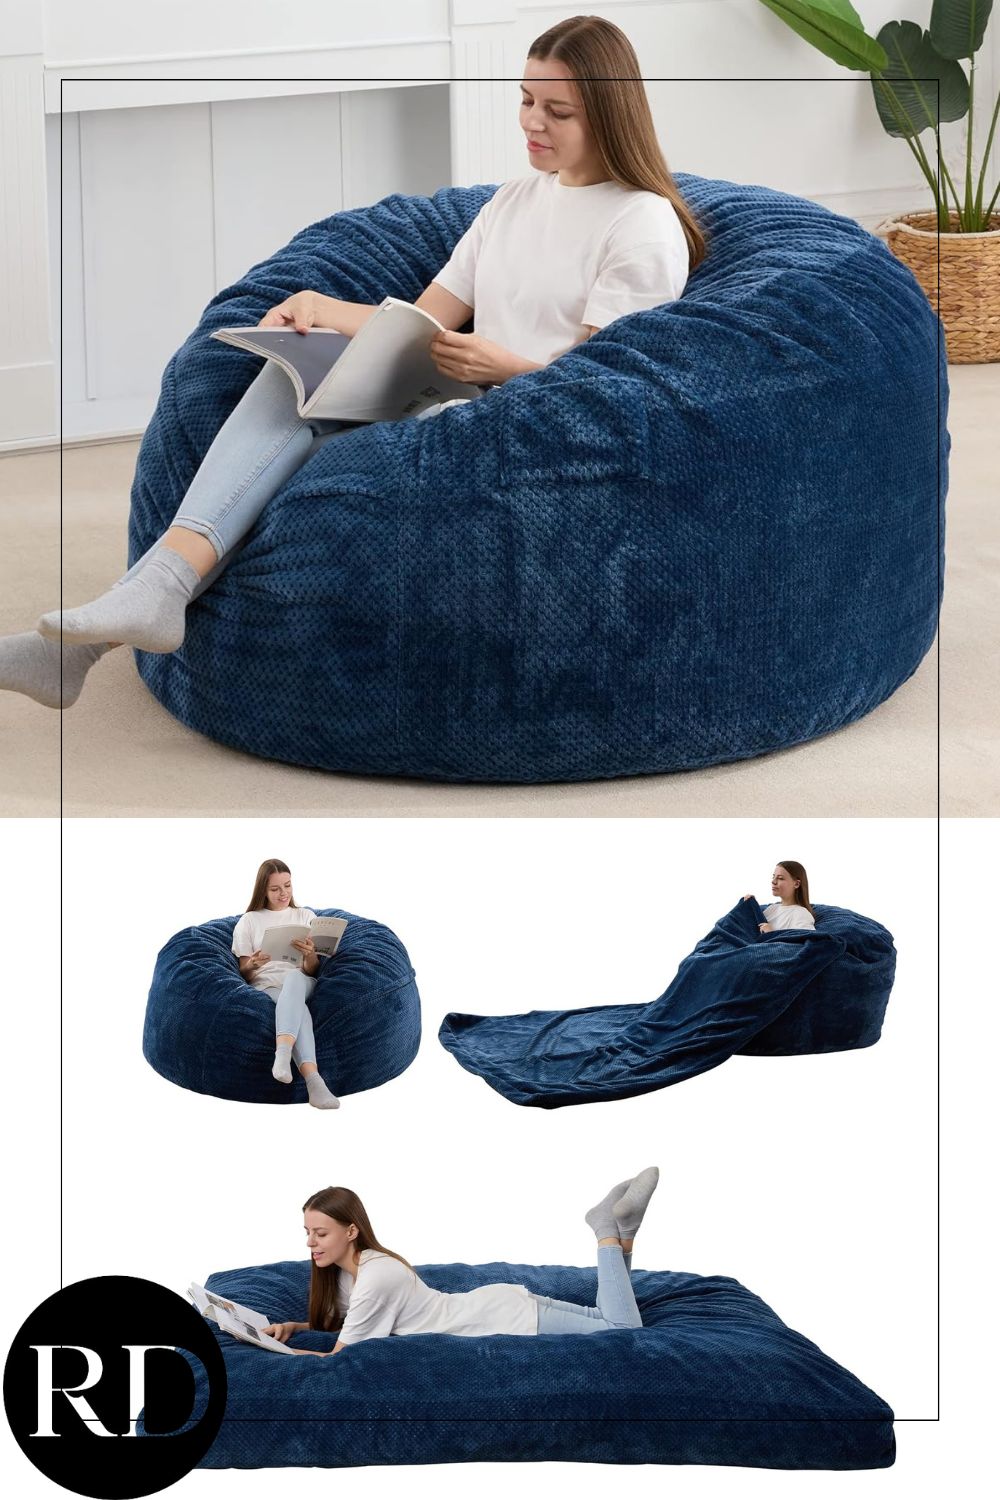 Bean Bag Chairs, Variable Shape from Bean Bag to Bed, Convertible Bean Bag Chair for Home, Bedroom, Living Room (Blue, Full)